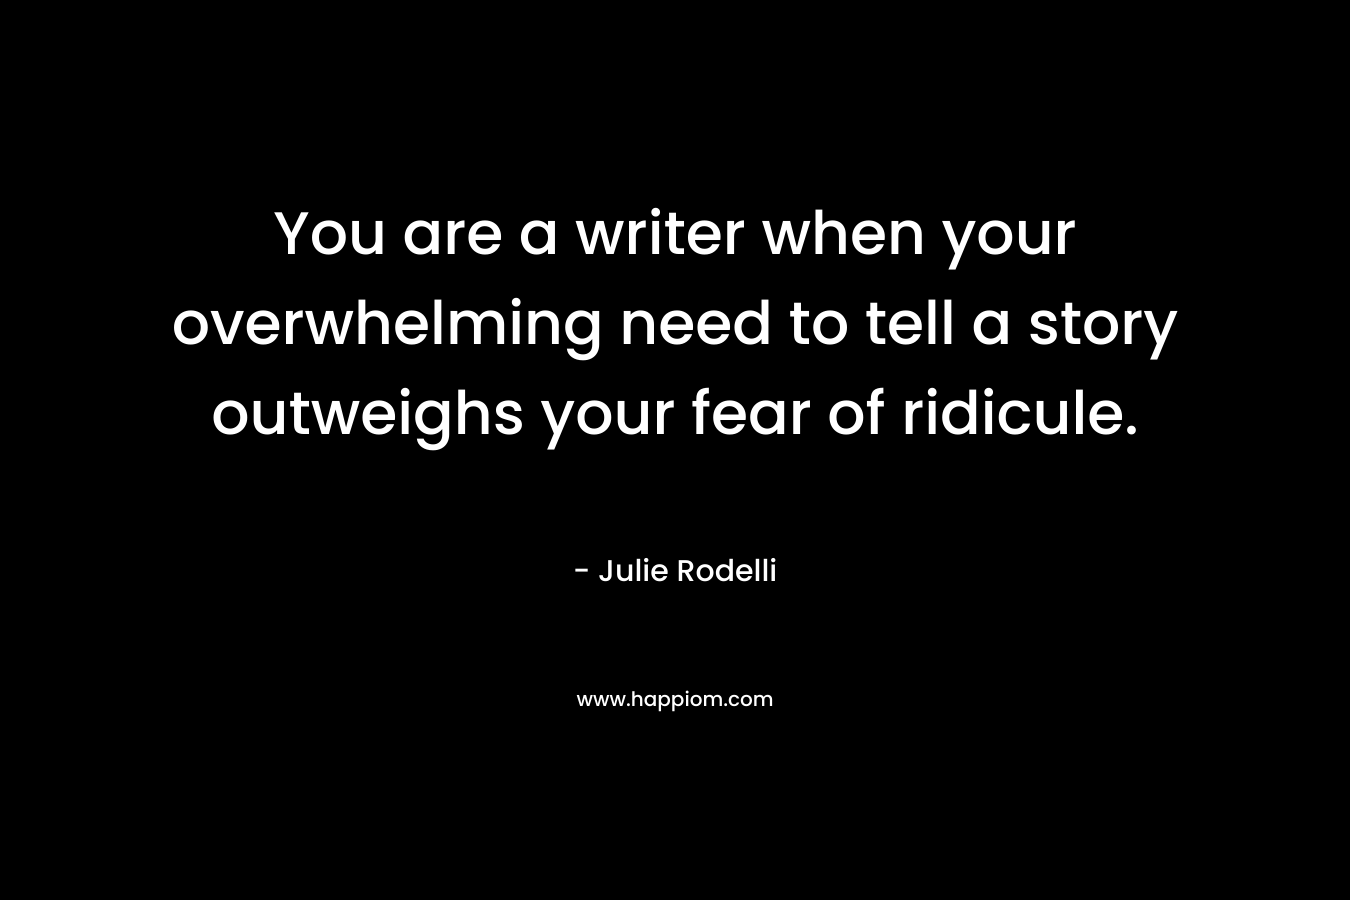 You are a writer when your overwhelming need to tell a story outweighs your fear of ridicule. – Julie Rodelli